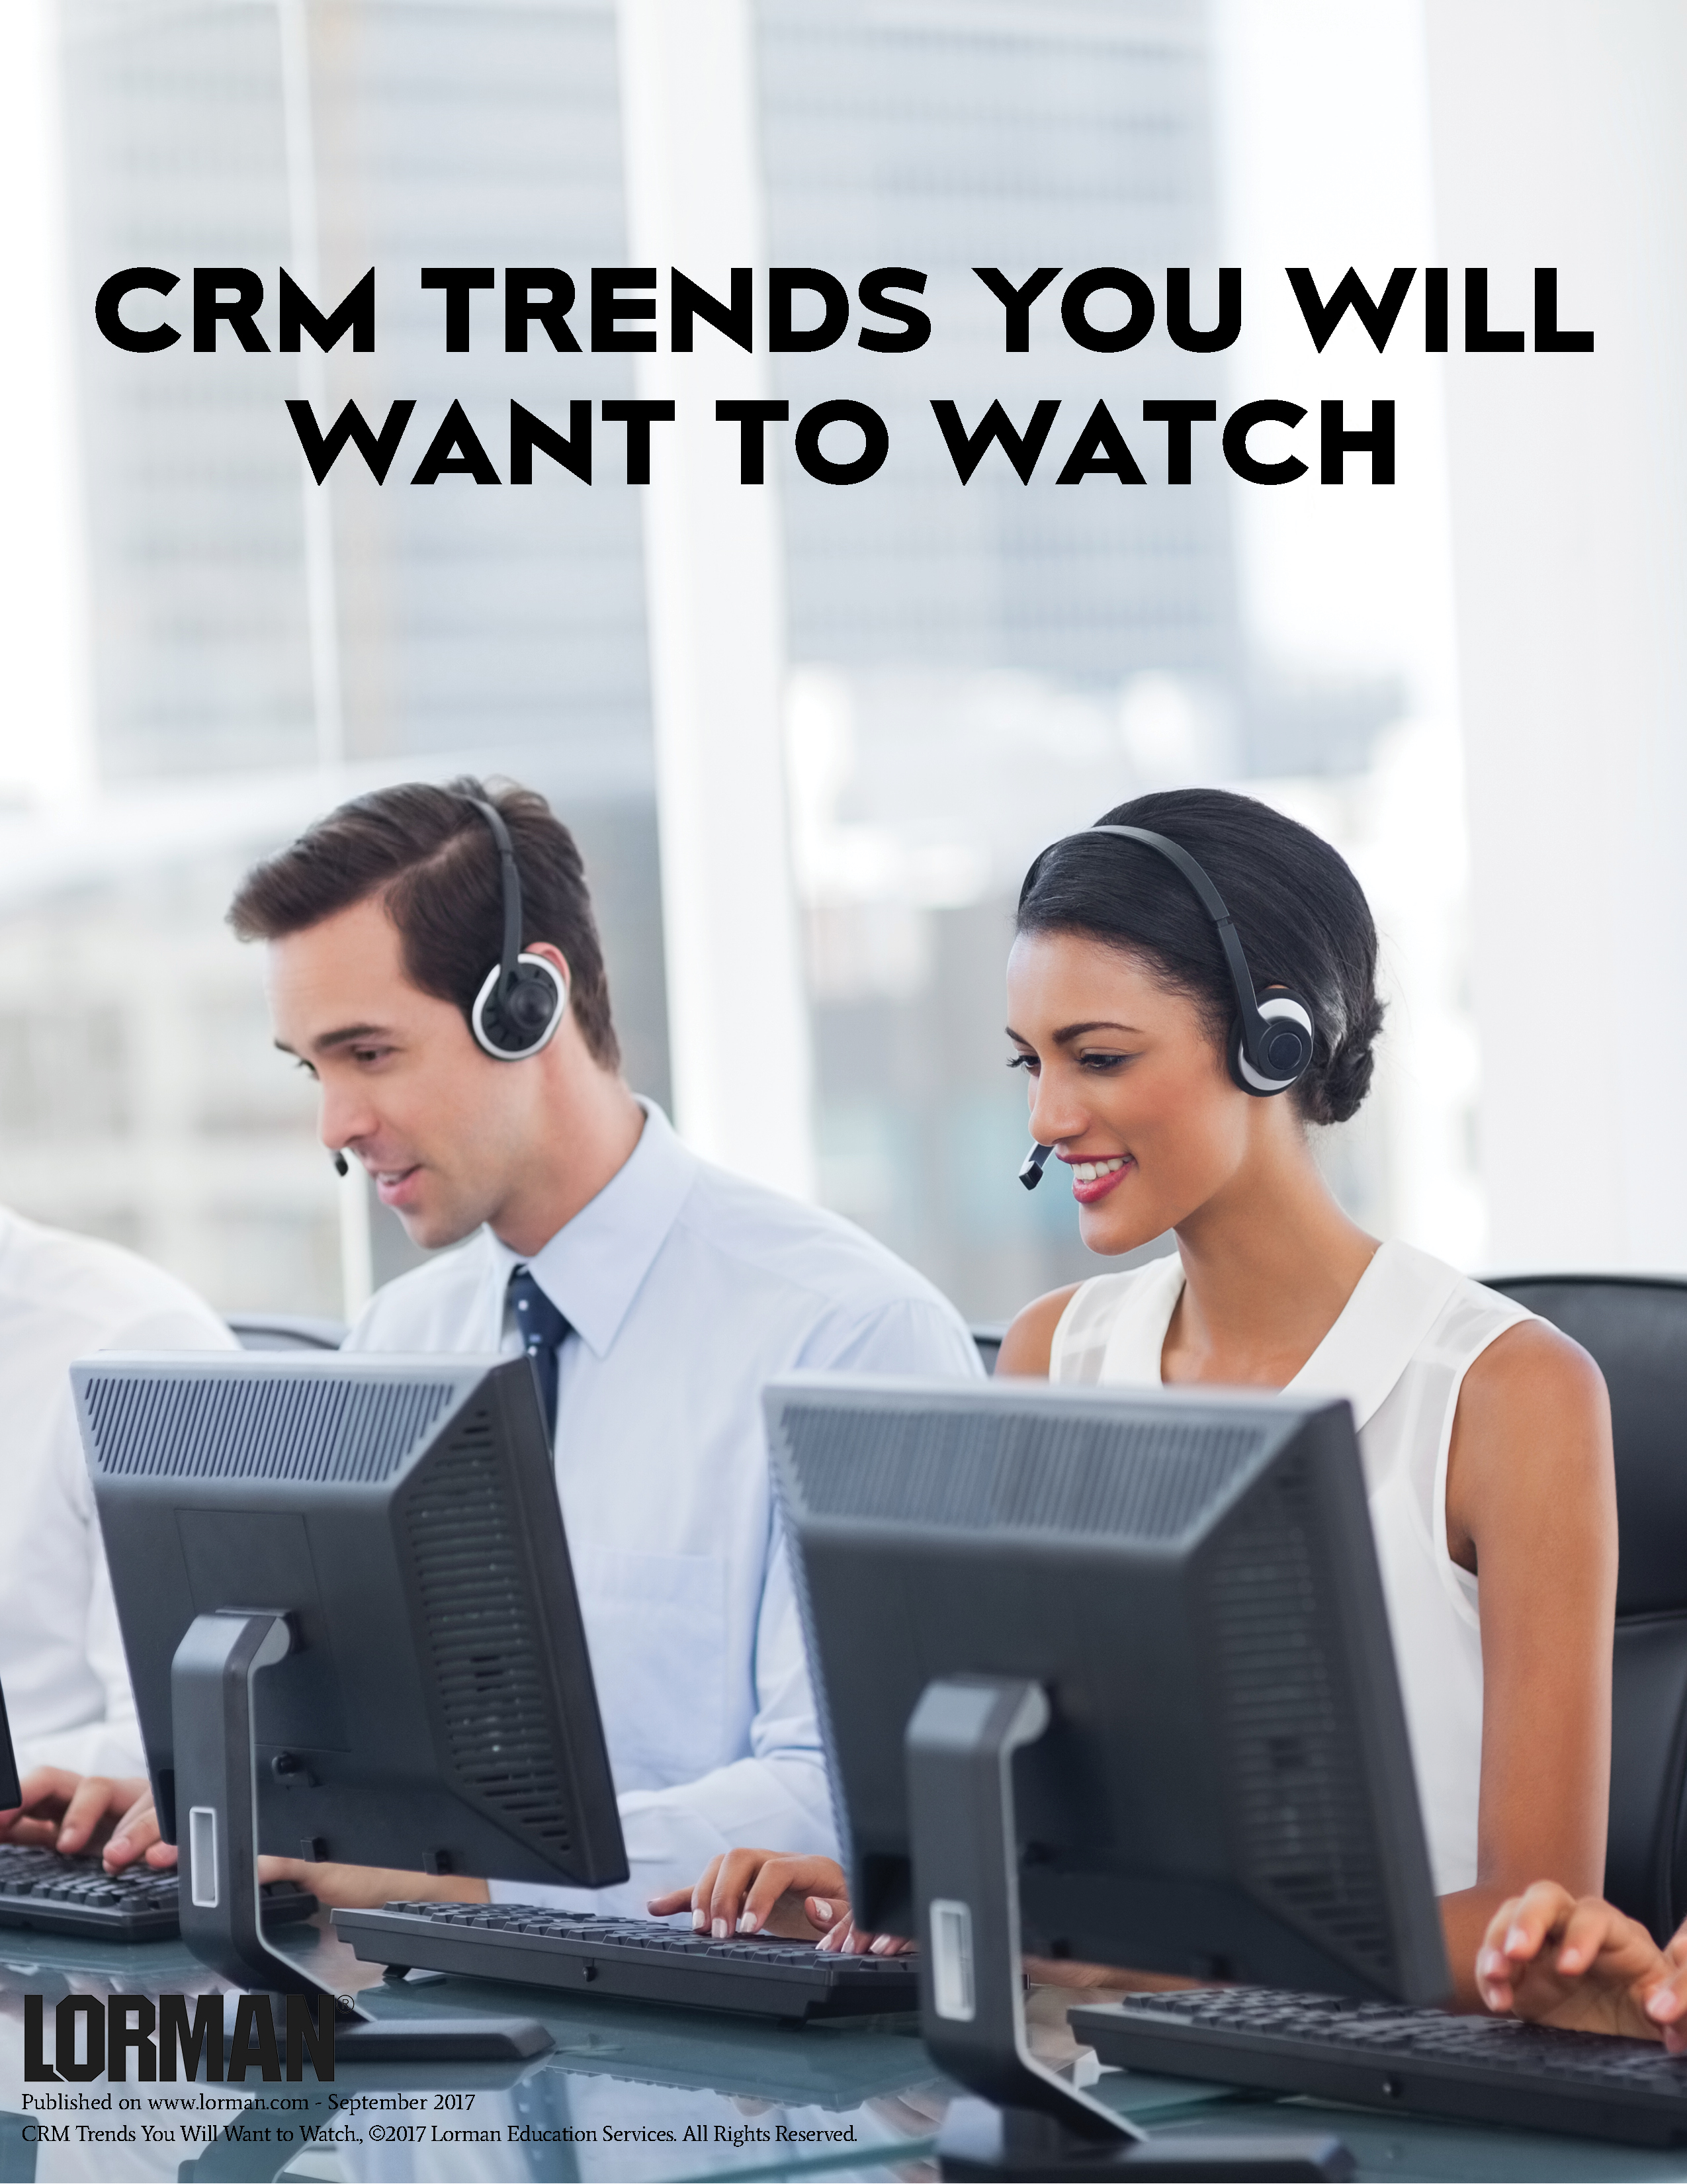 CRM Trends You Will Want to Watch